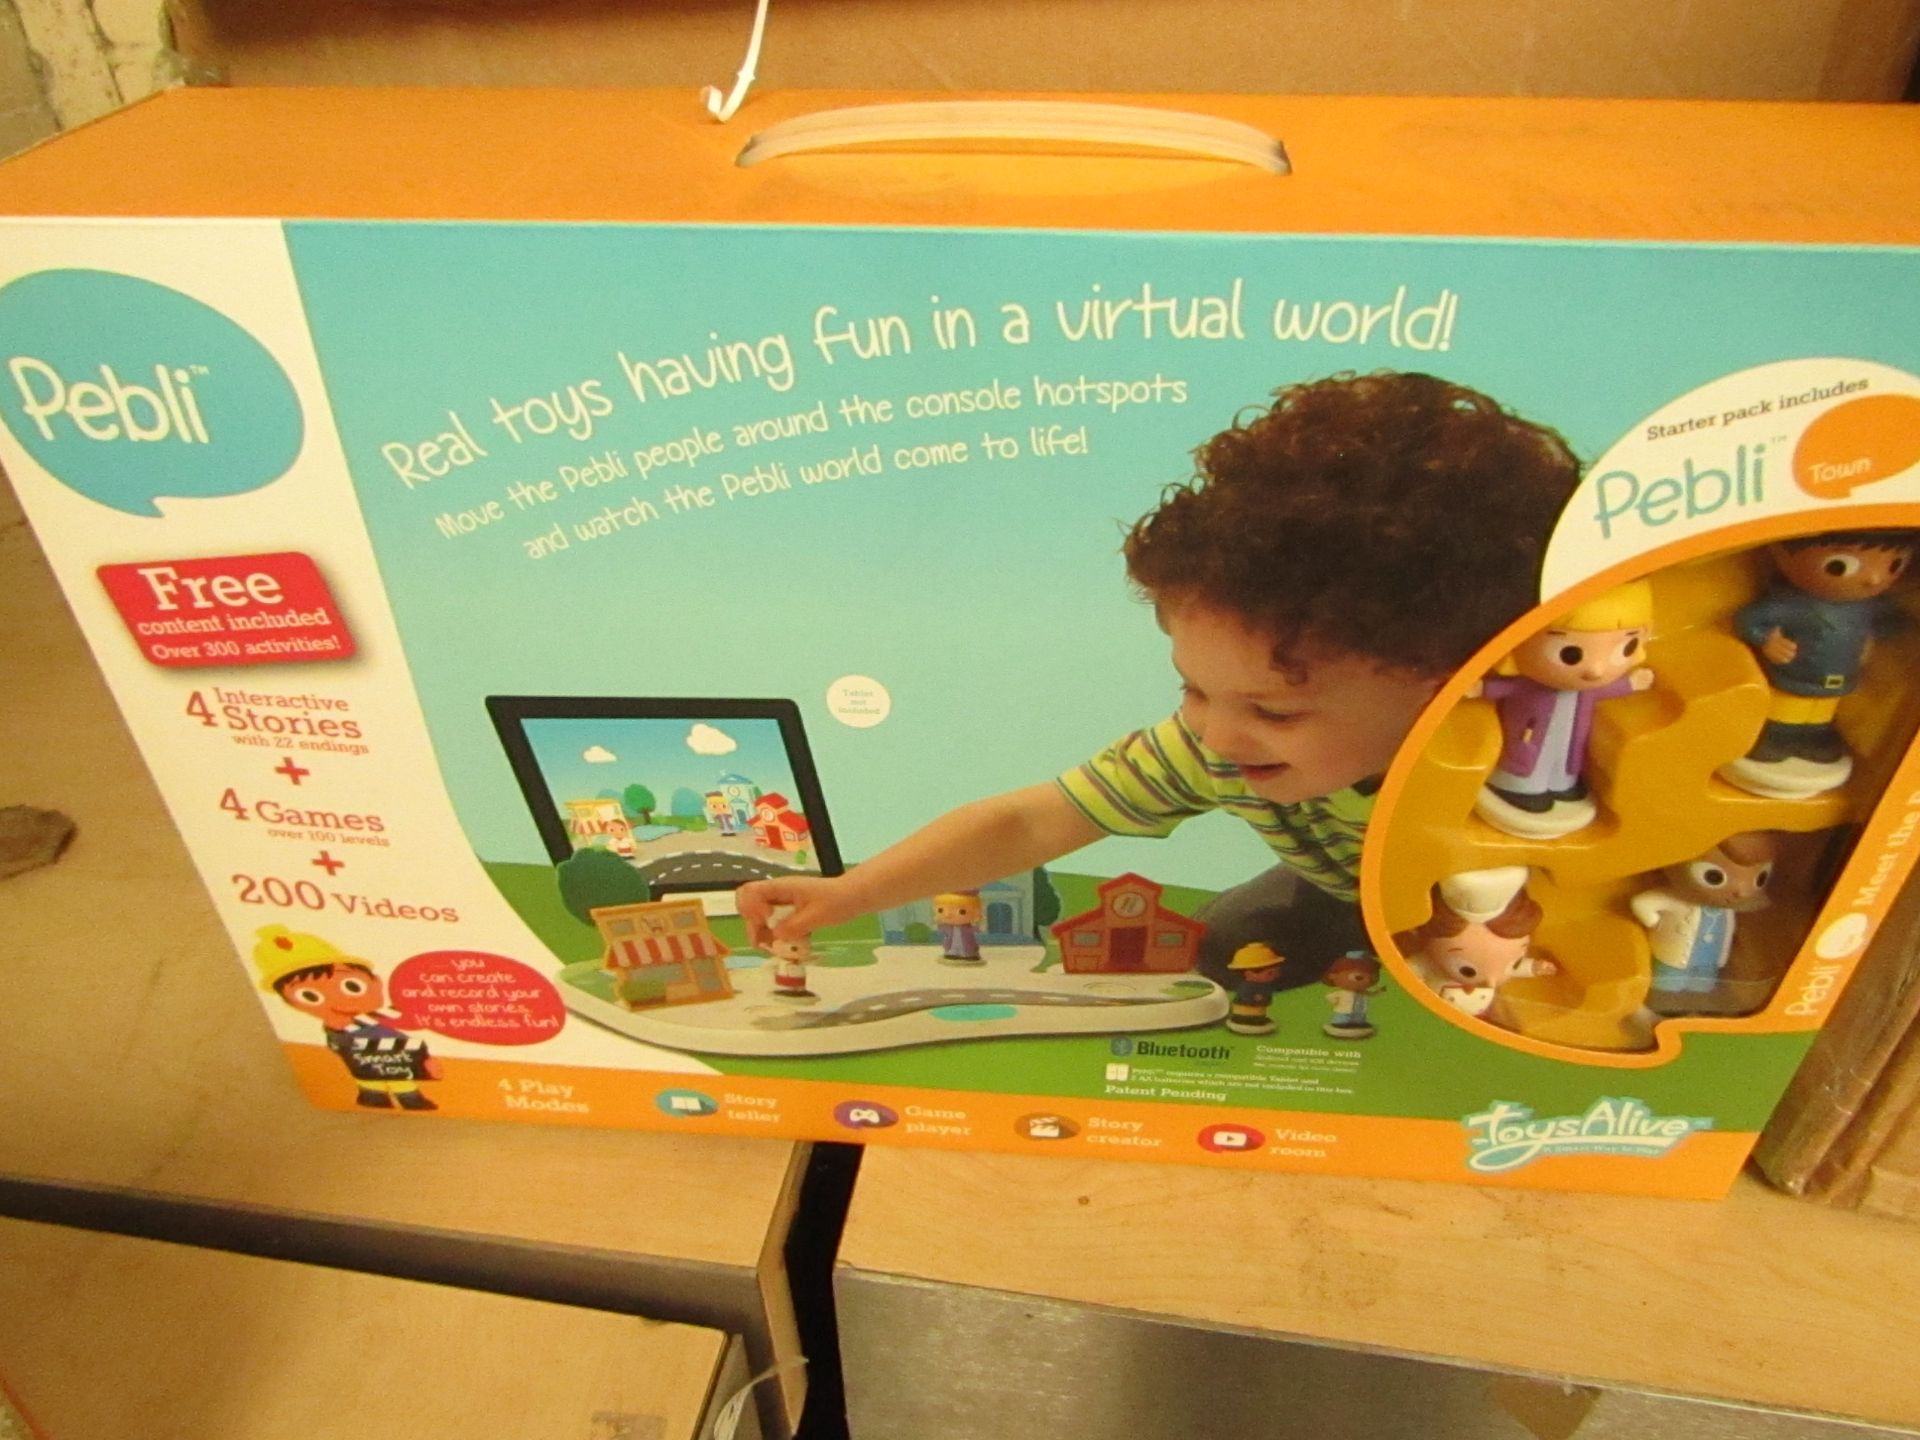 Toys alive Pebil Starter Pack includes smart bluetooth board and 4 characters, when set up it